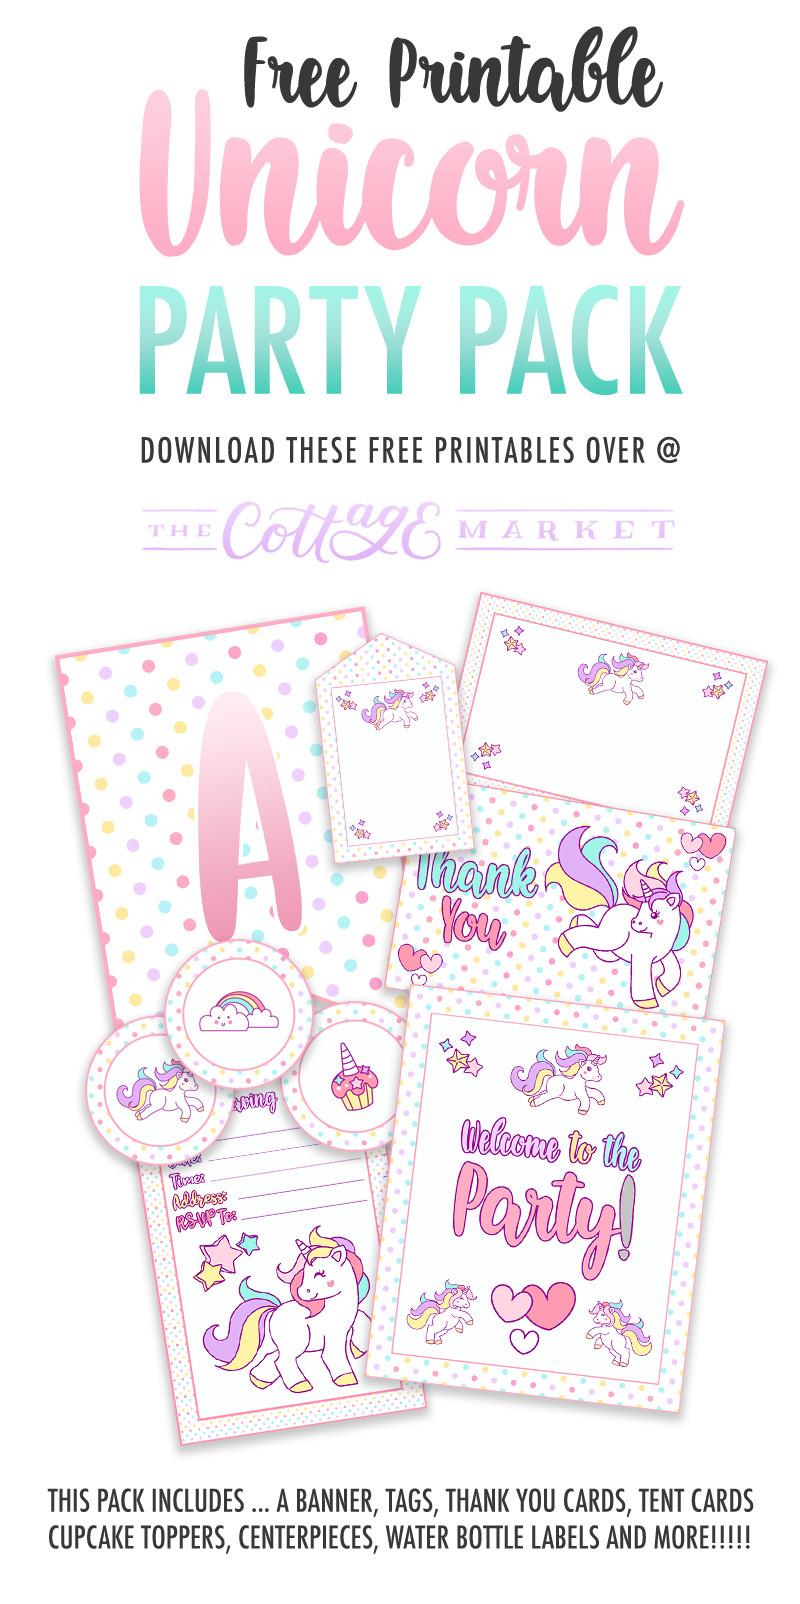 Free Birthday Party Printables Decorations
 Free Printable Unicorn Party Decorations Pack The